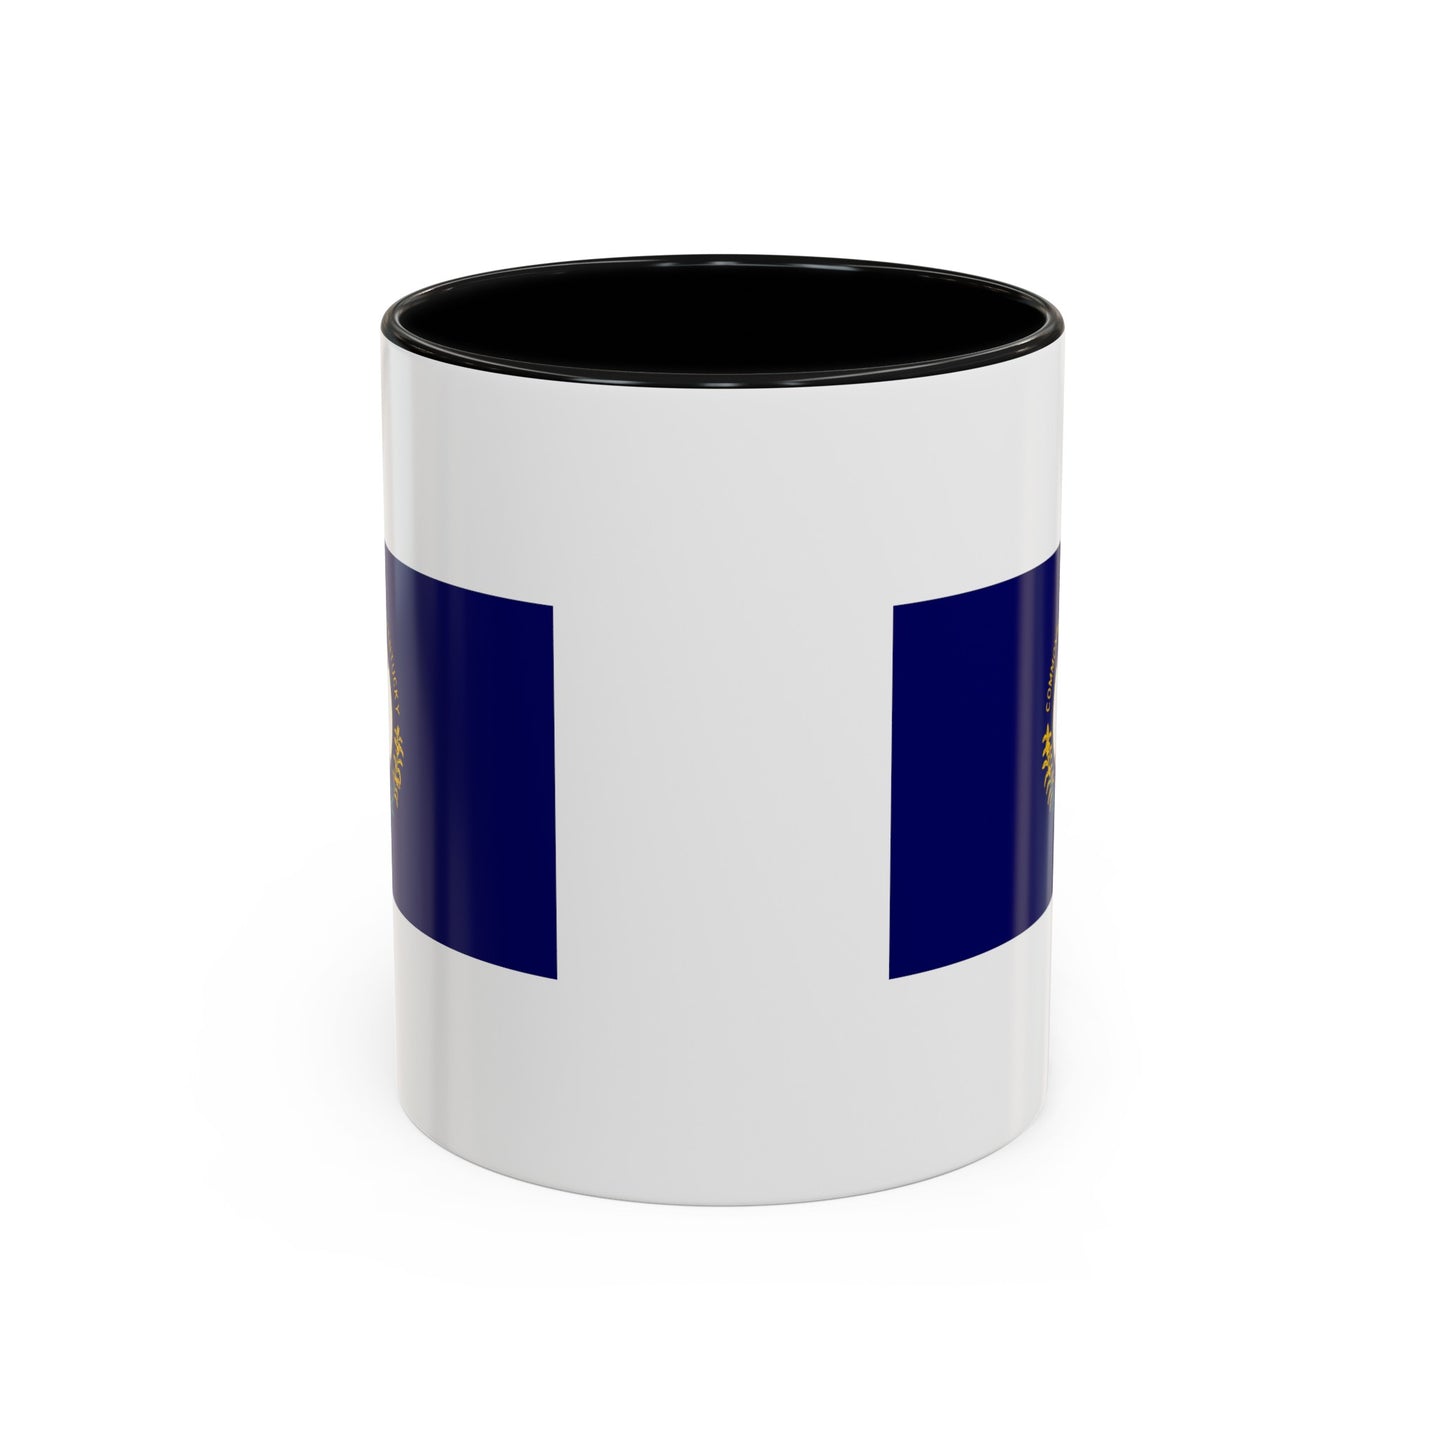 Commonwealth of Kentucky State Flag - Double Sided Black Accent White Ceramic Coffee Mug 11oz by TheGlassyLass.com